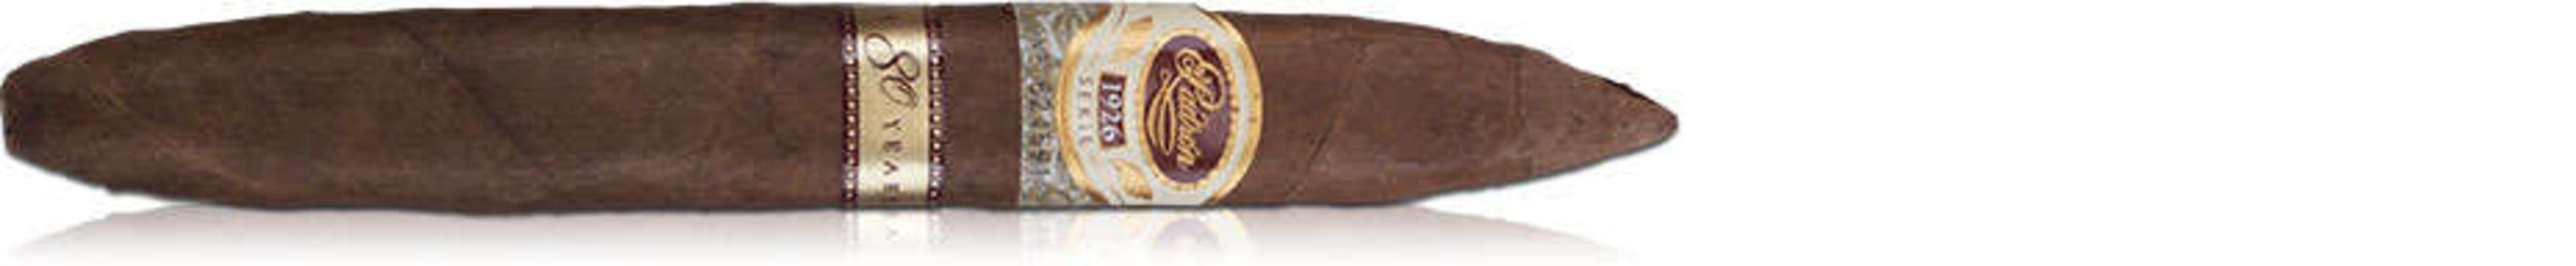 Padron Serie 1926 80 Years 5 Pack Single